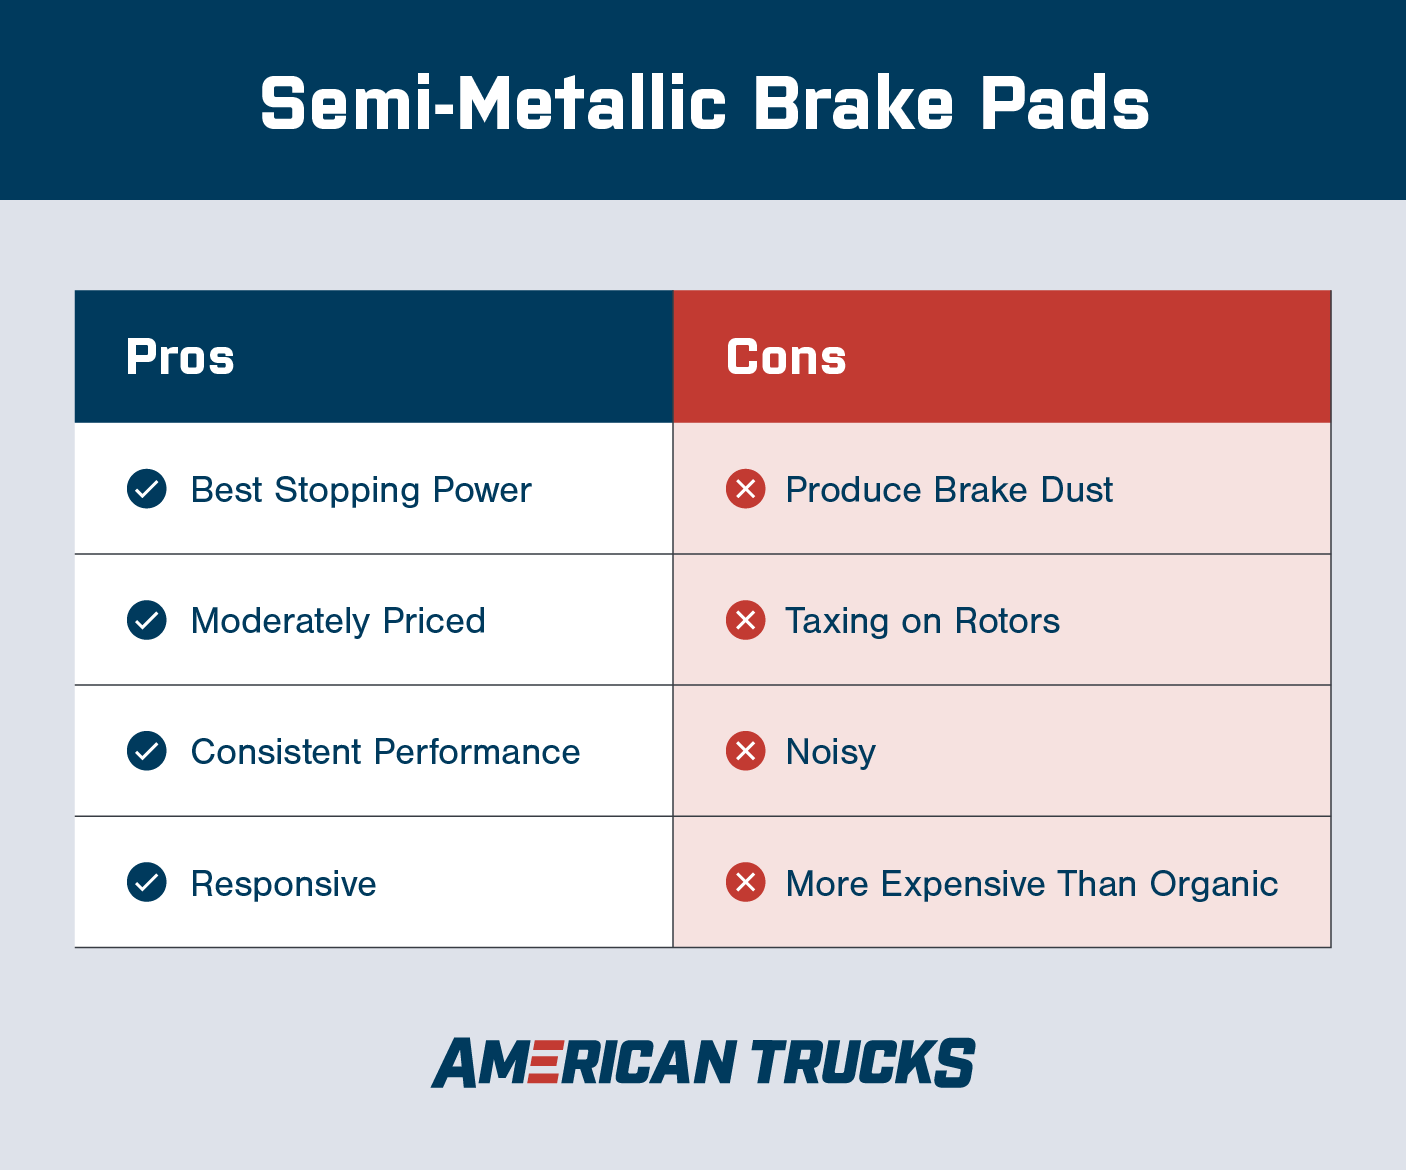 Chart breaking down pros and cons of semi-metallic brake pads